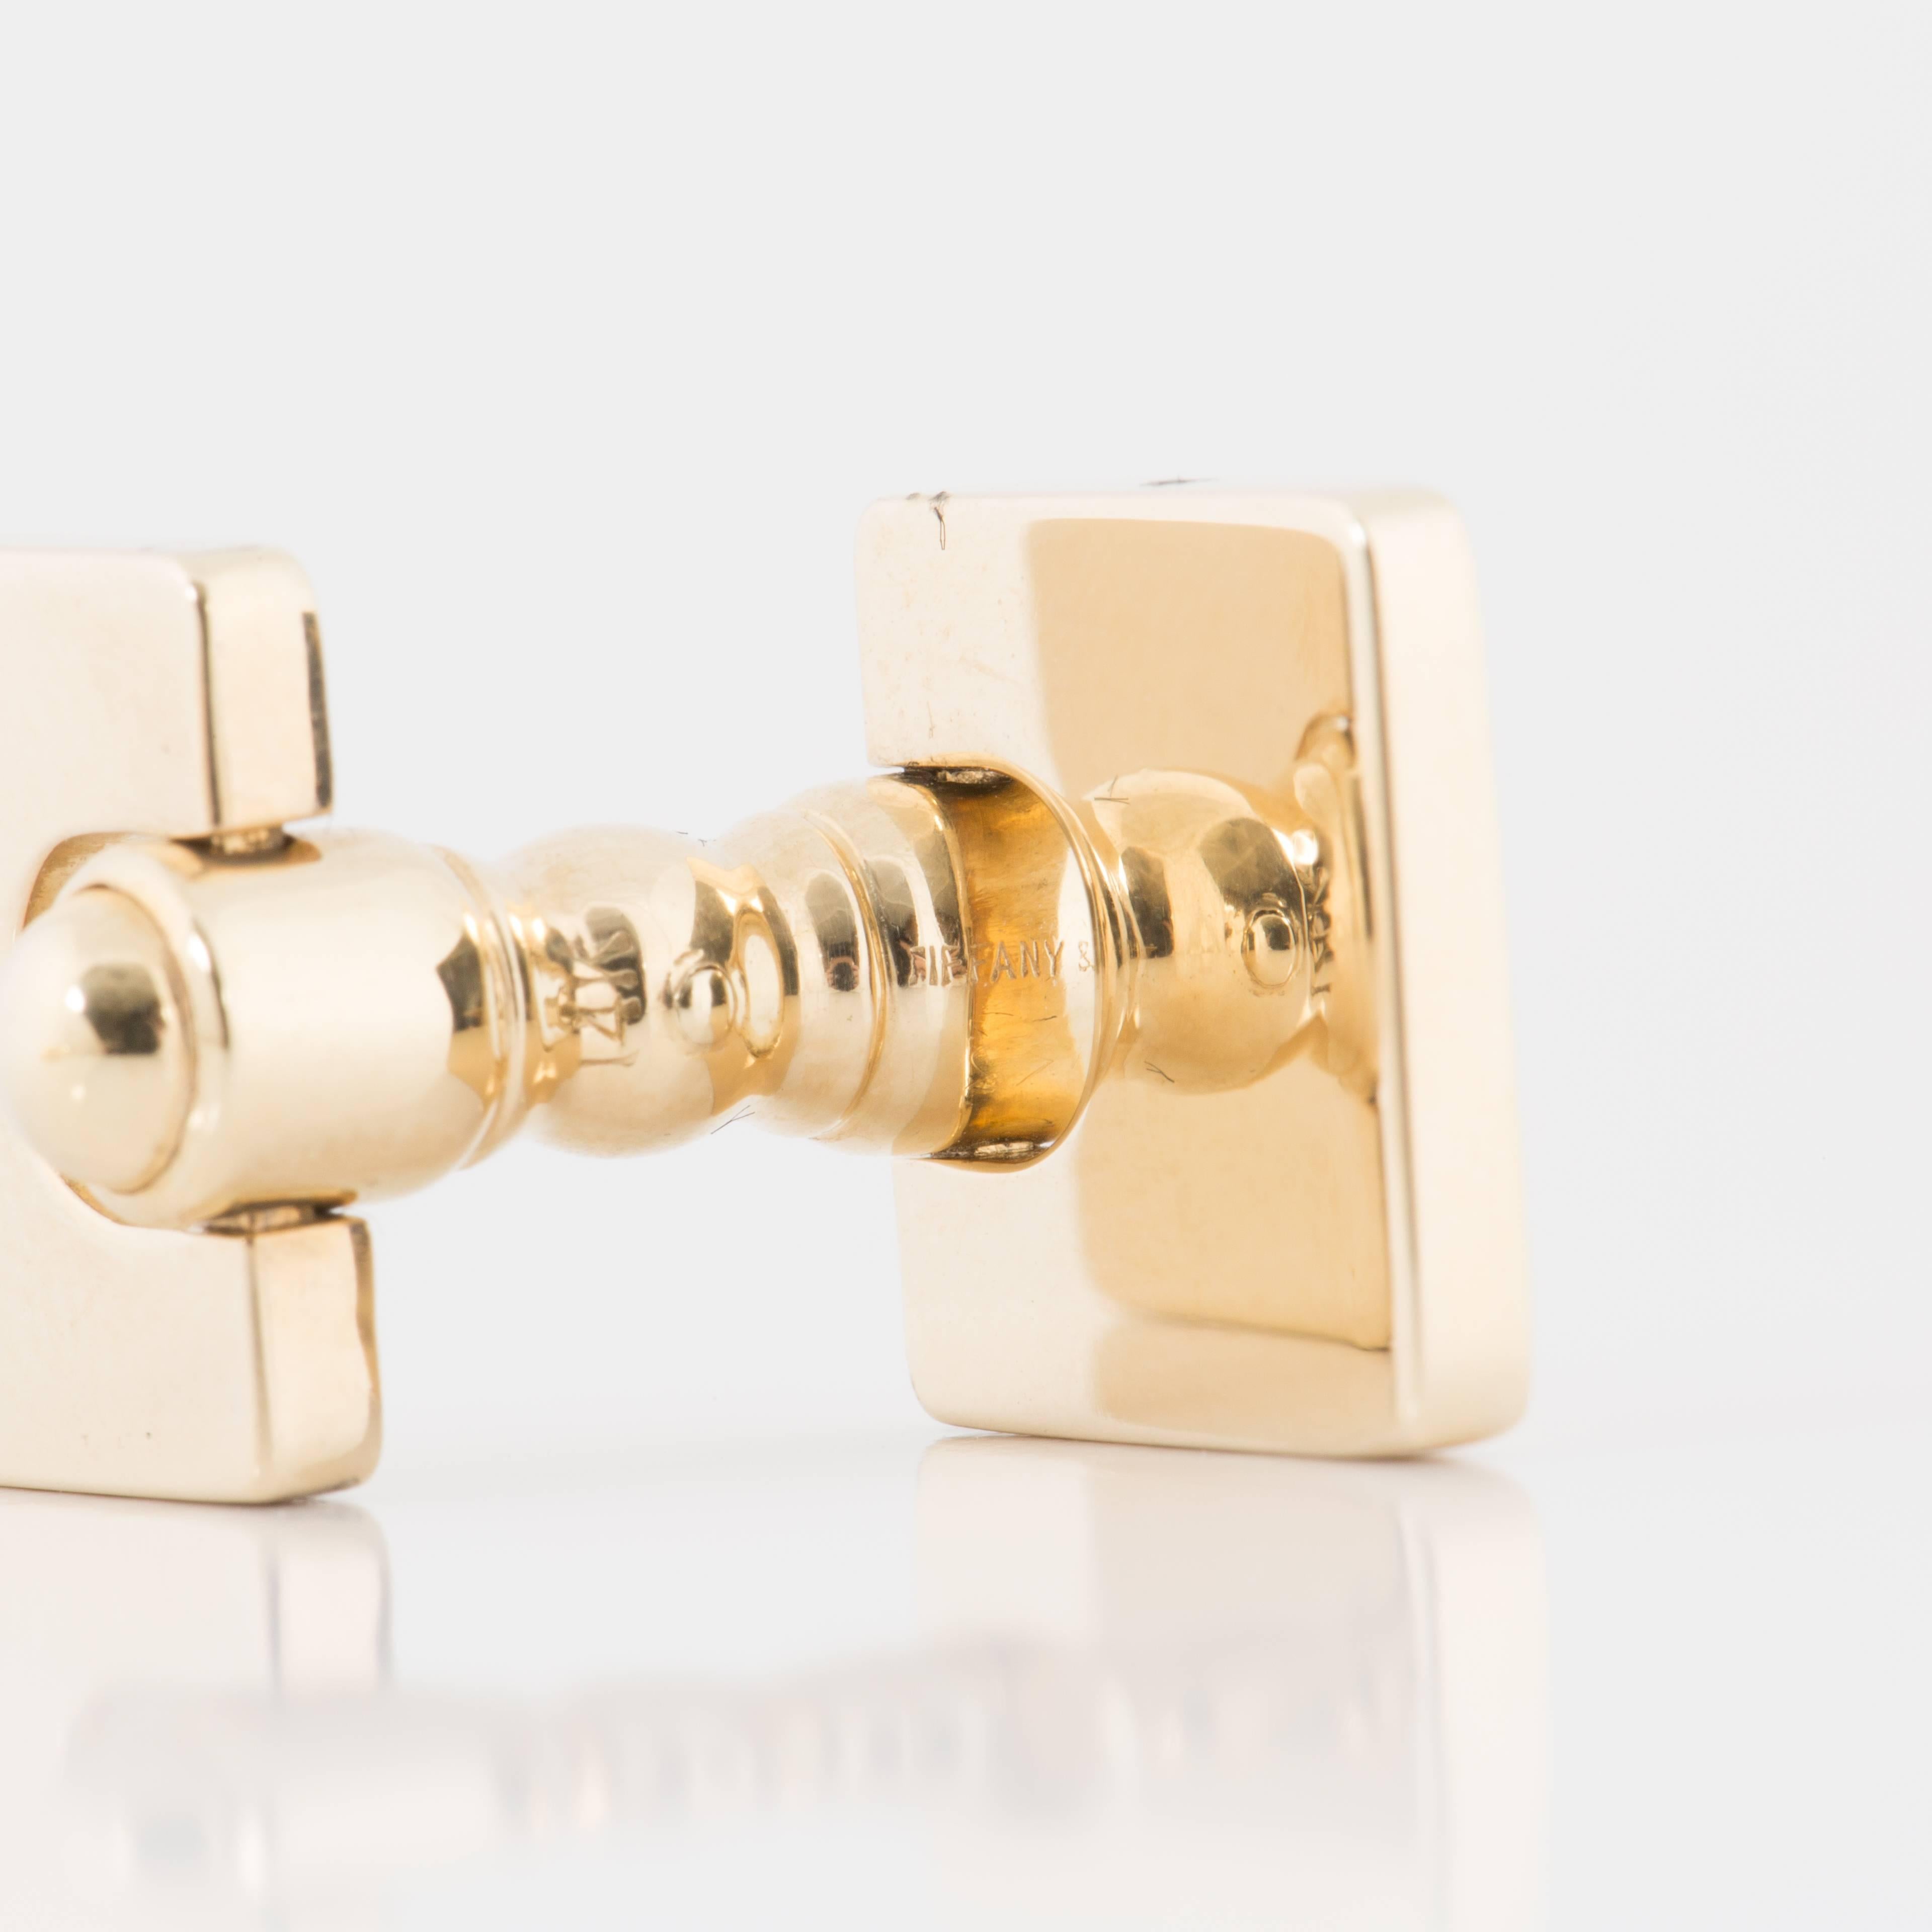 Tiffany & Co. cufflinks in 14K high polished yellow gold, marked 